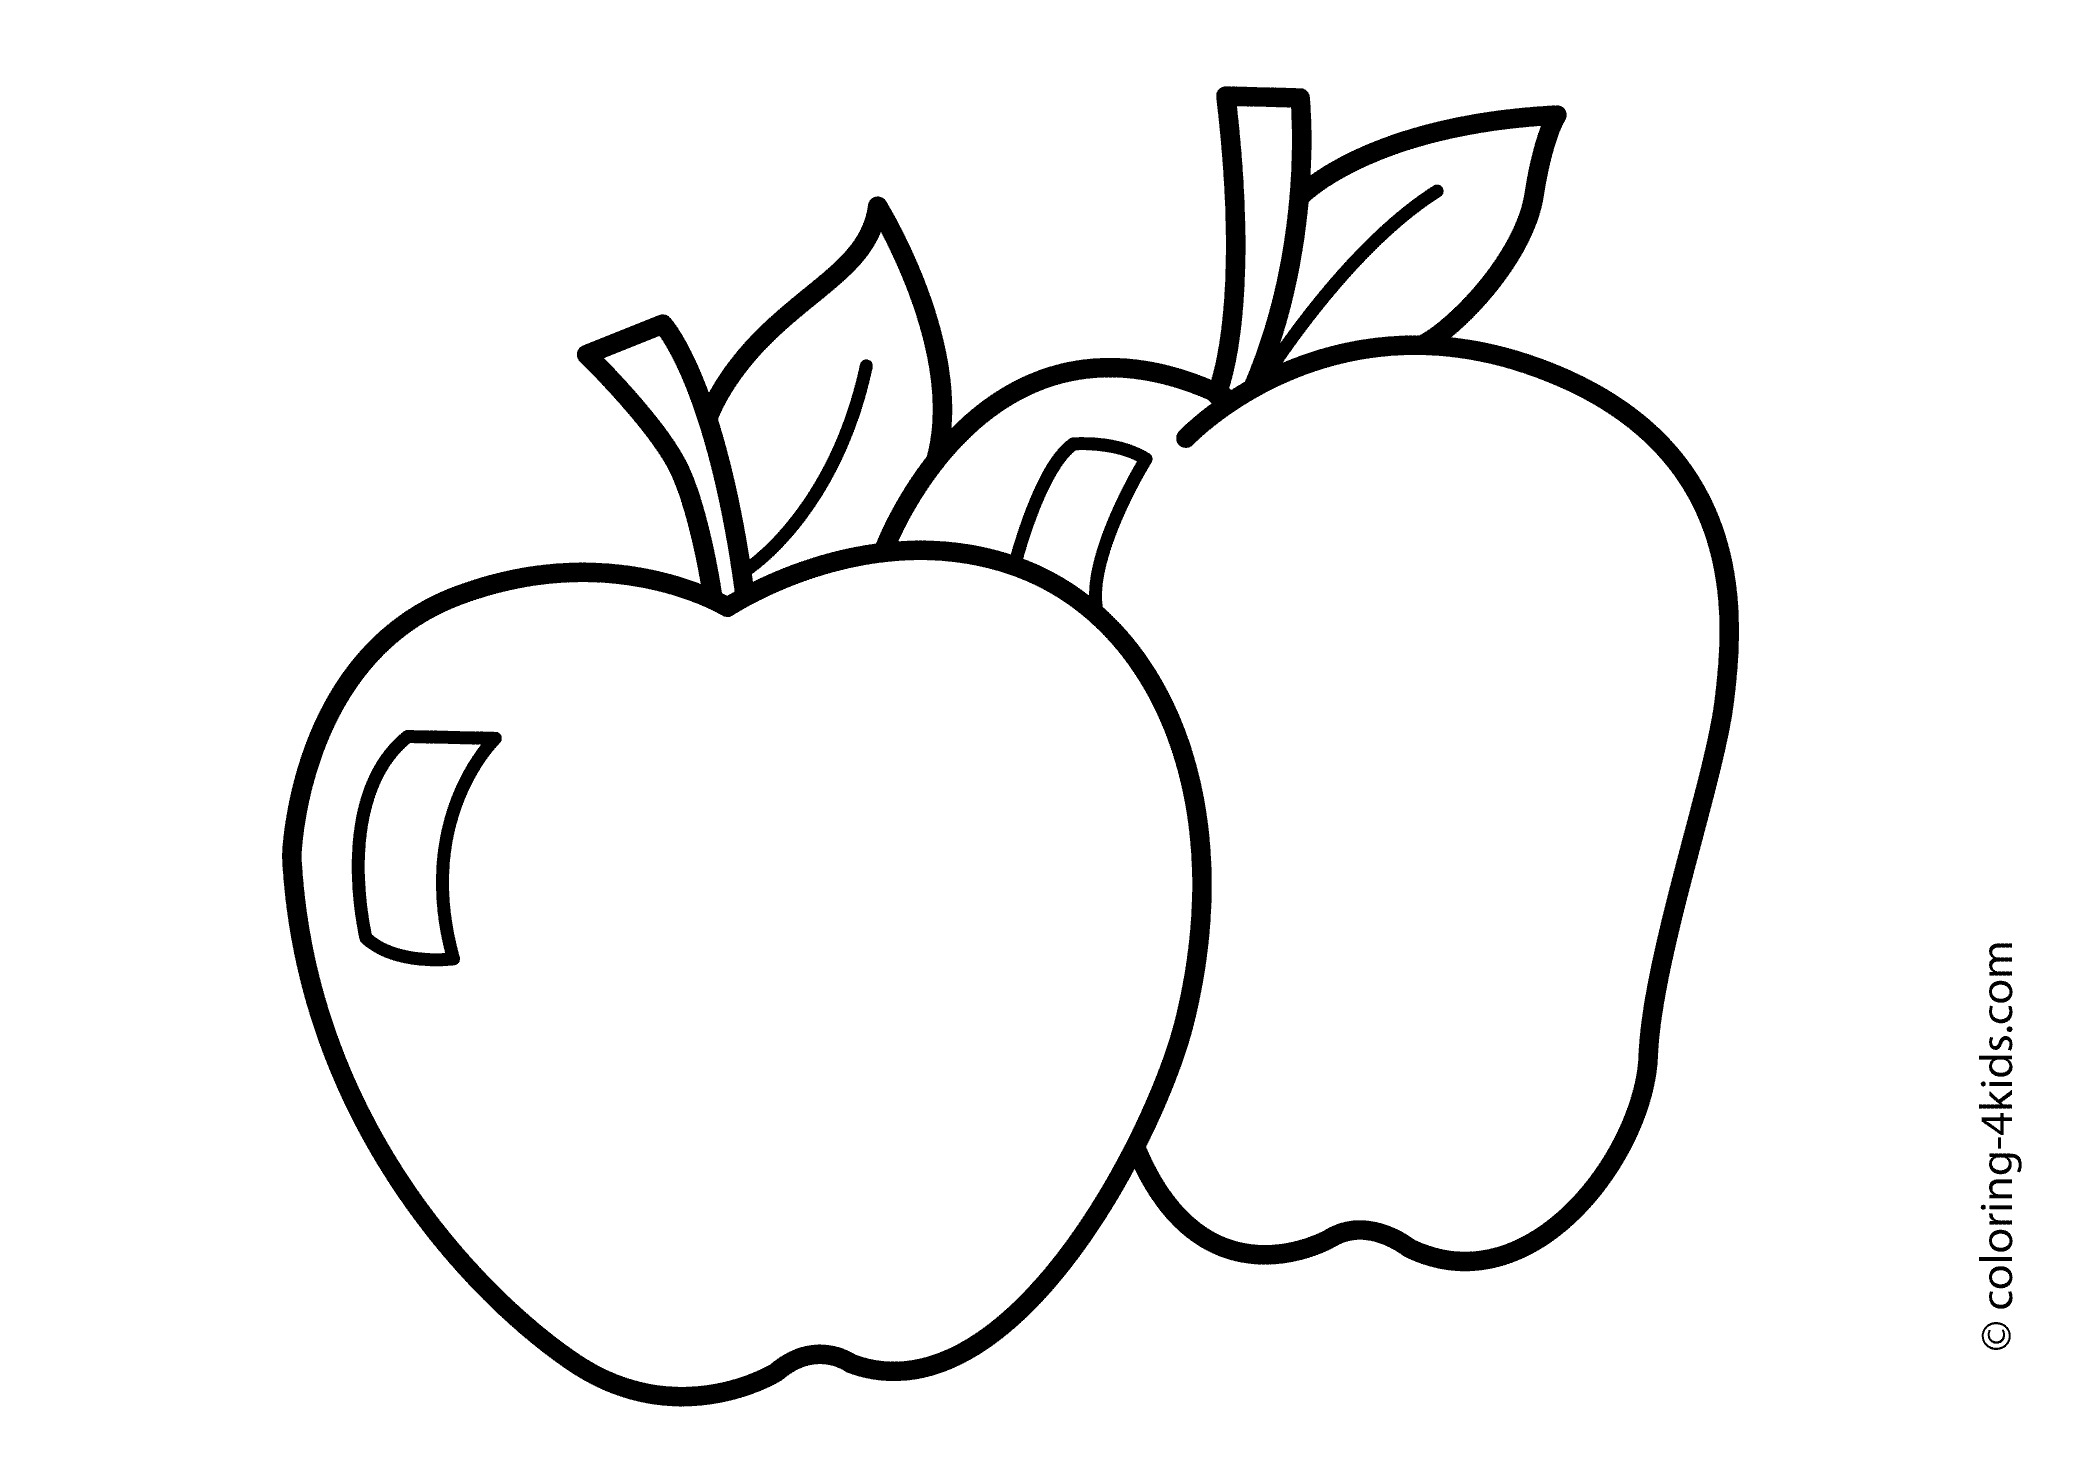 coloring page of an apple free printable apple coloring pages for kids cool2bkids apple an of coloring page 